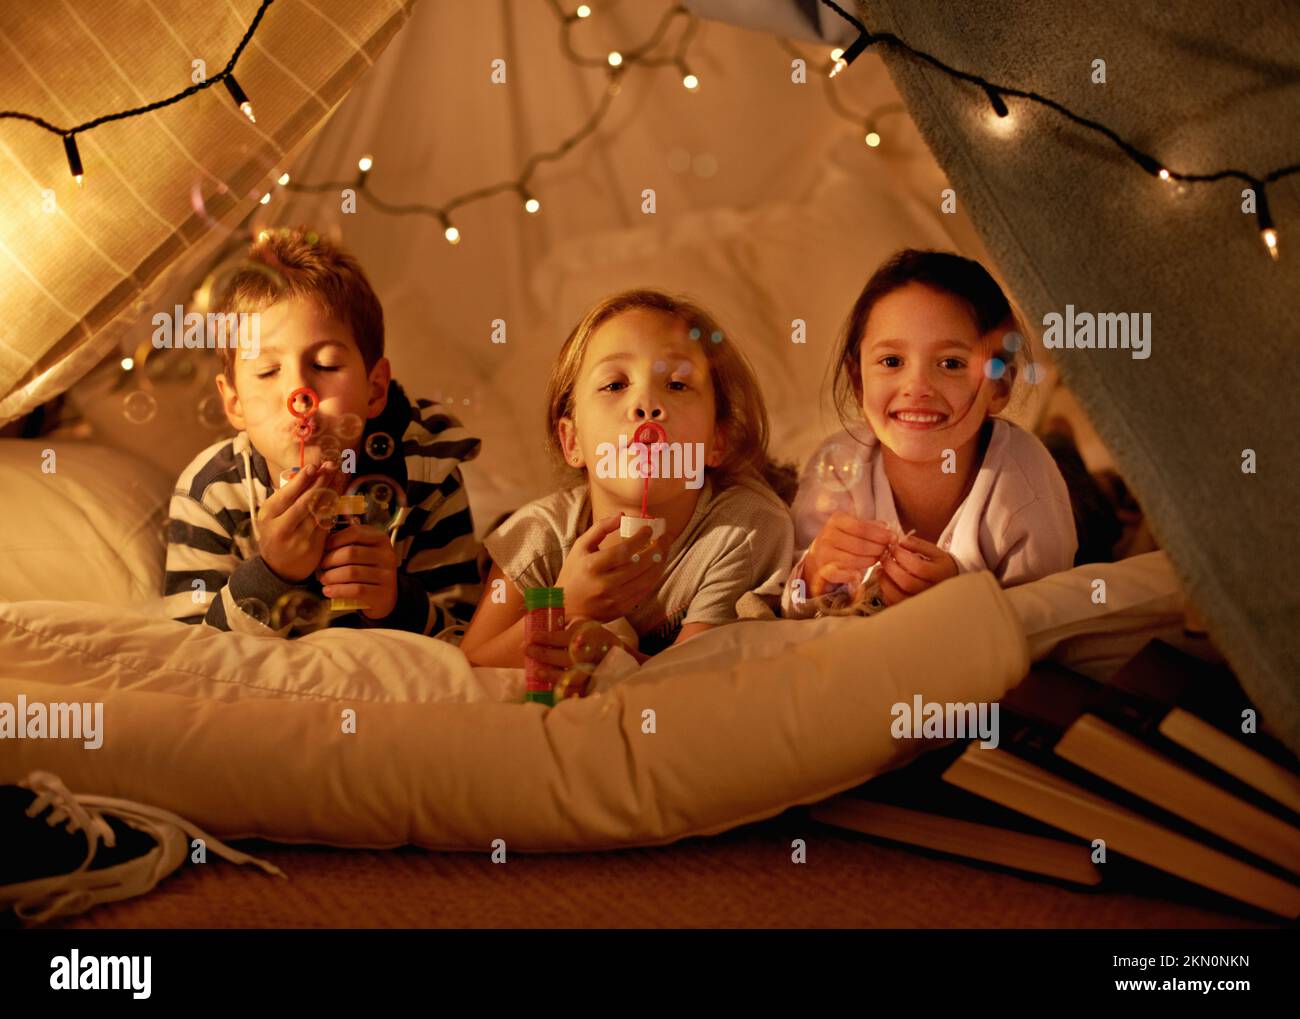 This is our fort. three young children in a blanket fort. Stock Photo